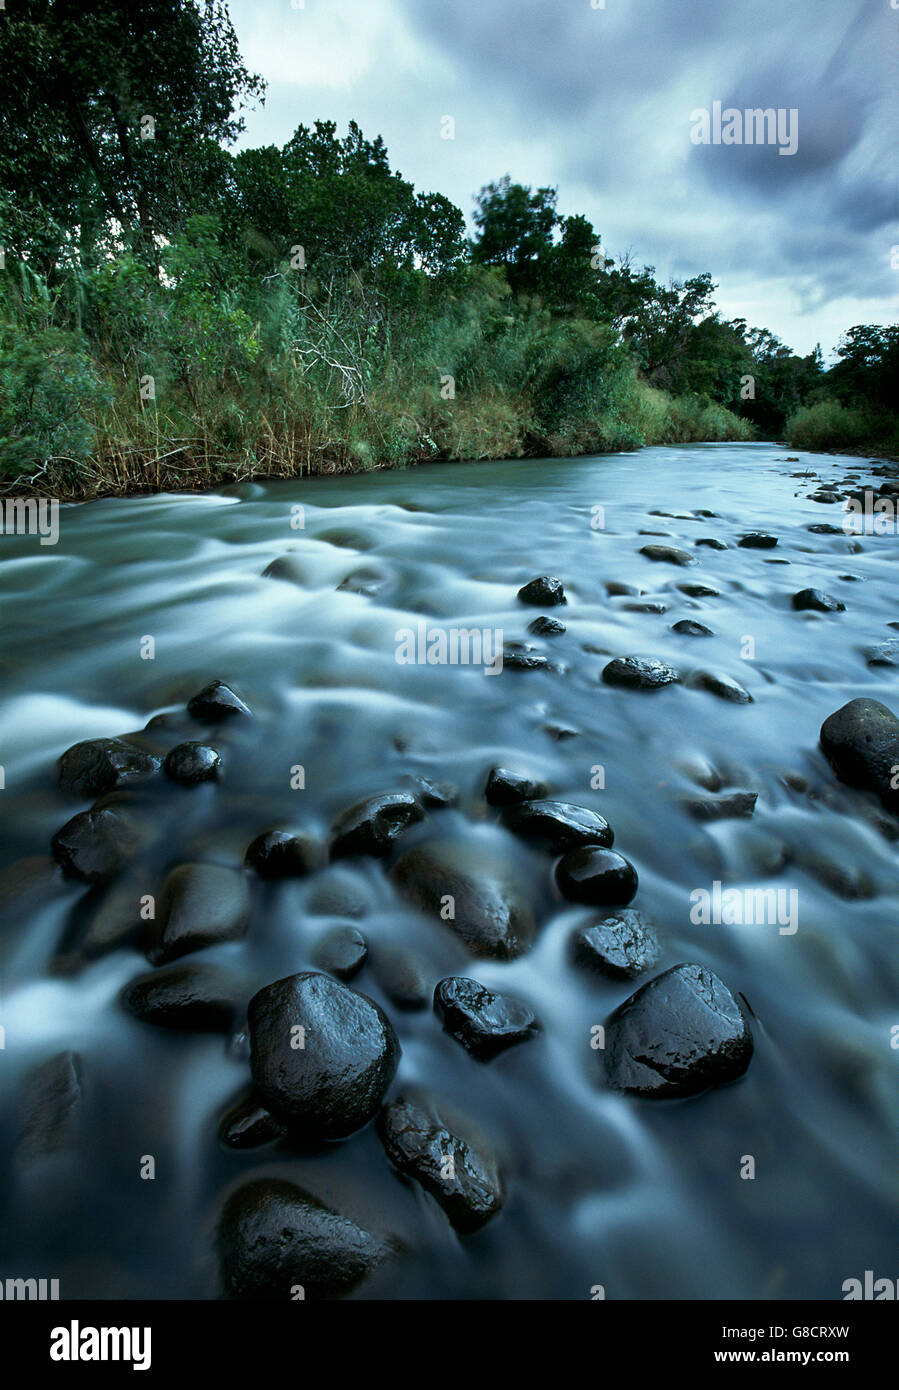 The Blyde River, Mpumalanga, South Africa. Stock Photo